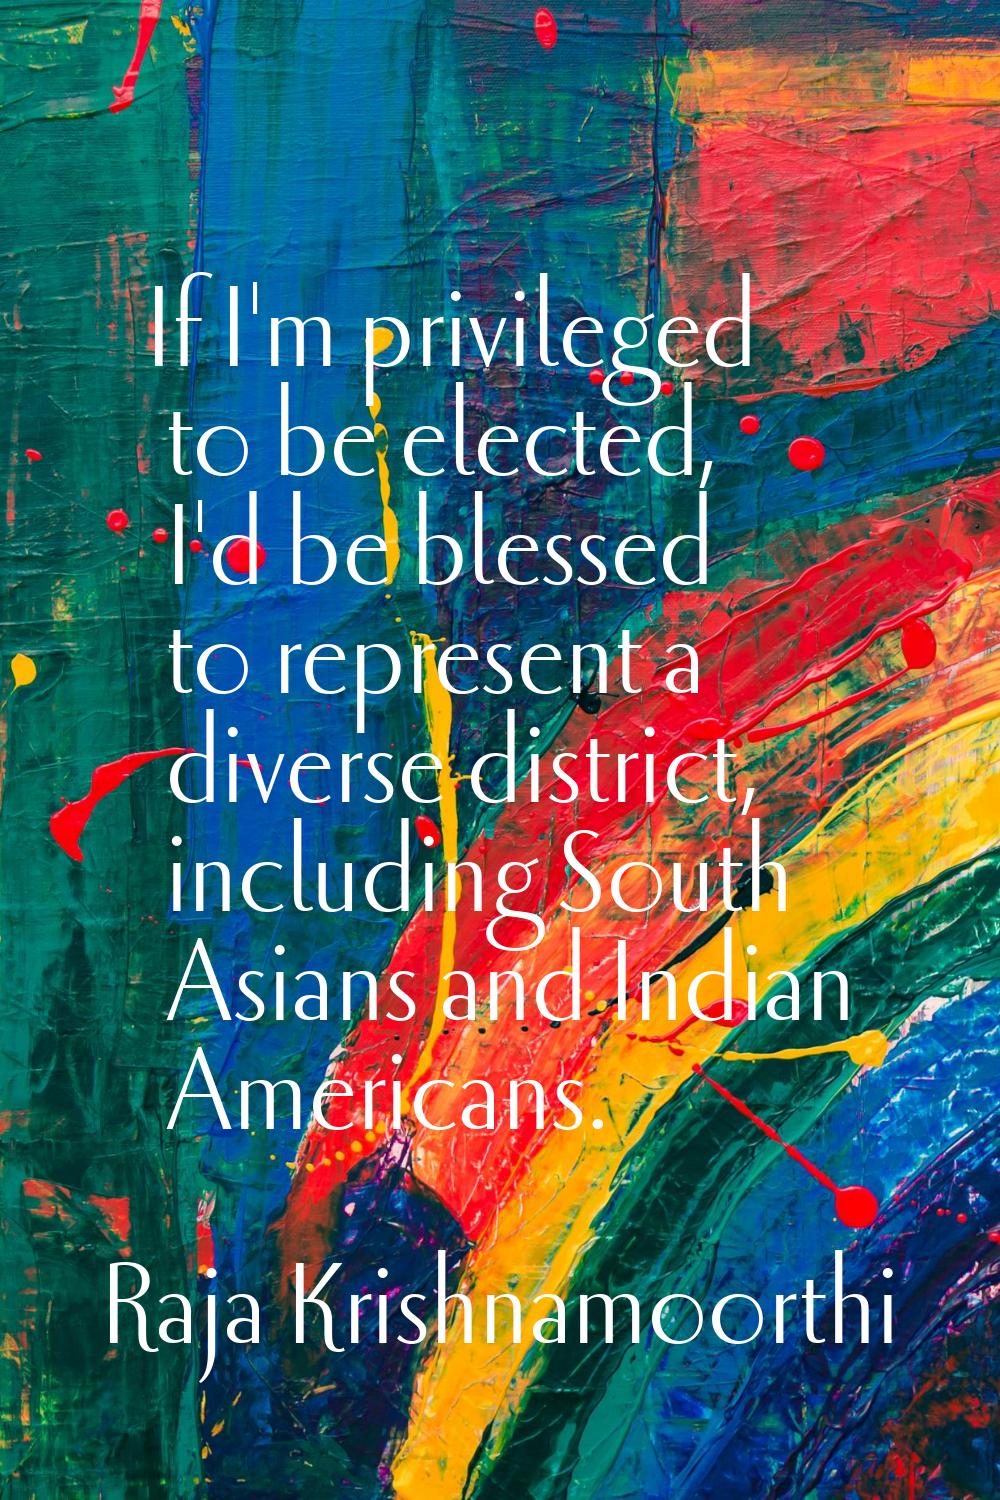 If I'm privileged to be elected, I'd be blessed to represent a diverse district, including South As